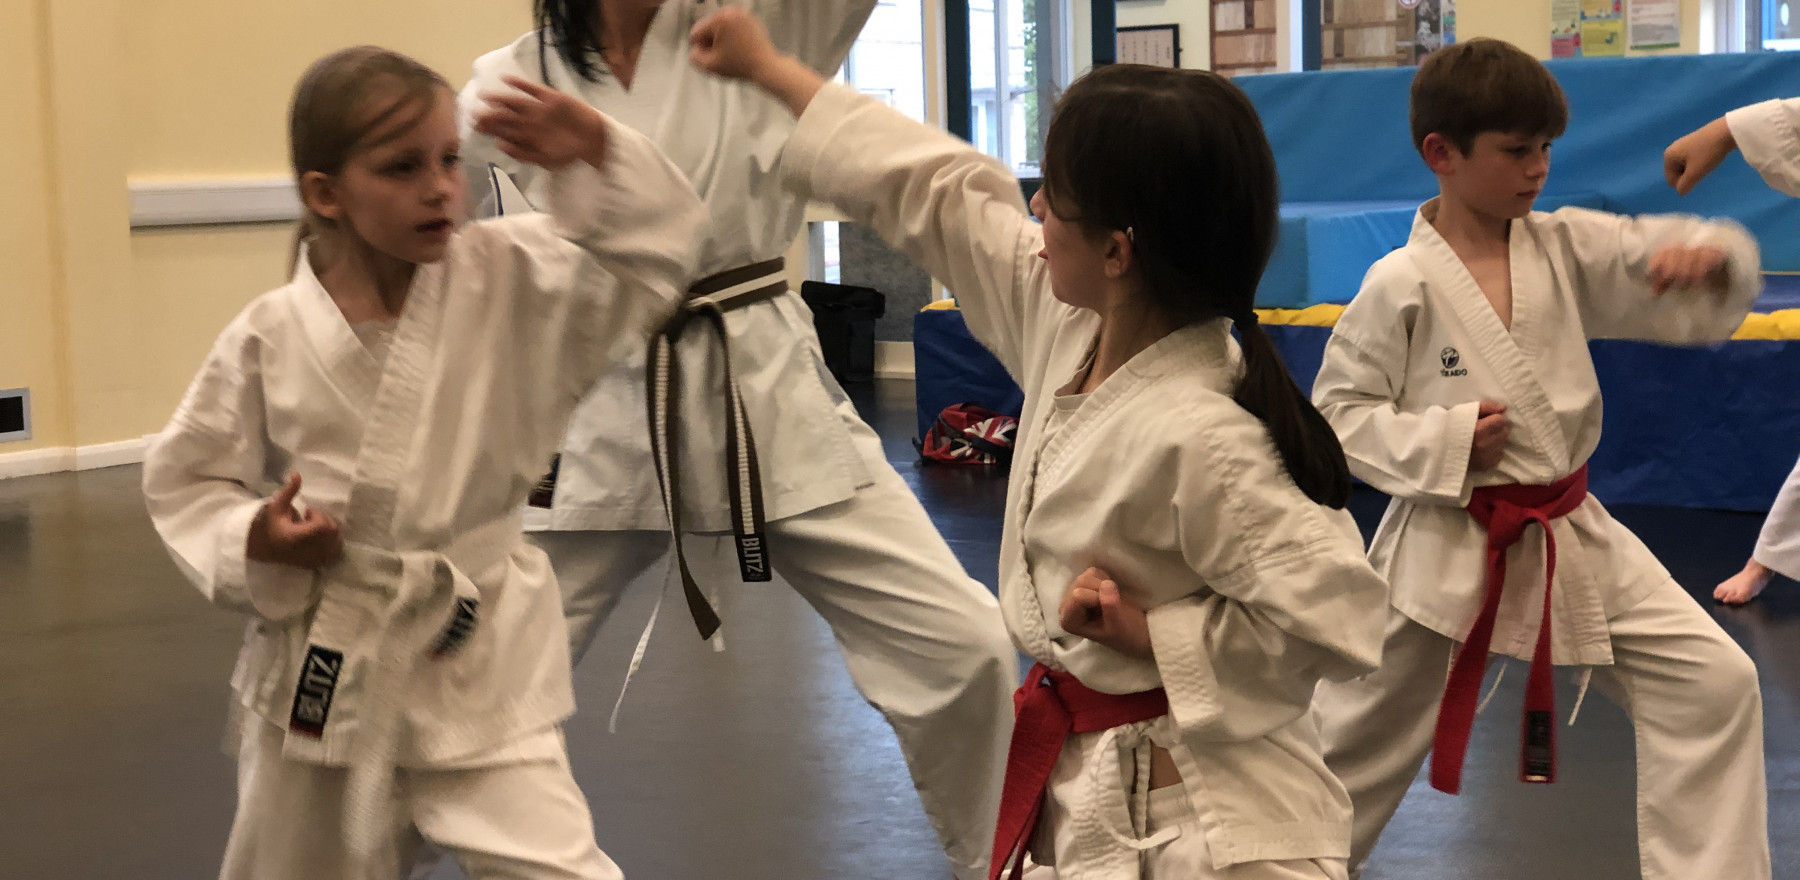 Traditional karate for all ages in a family friendly setting